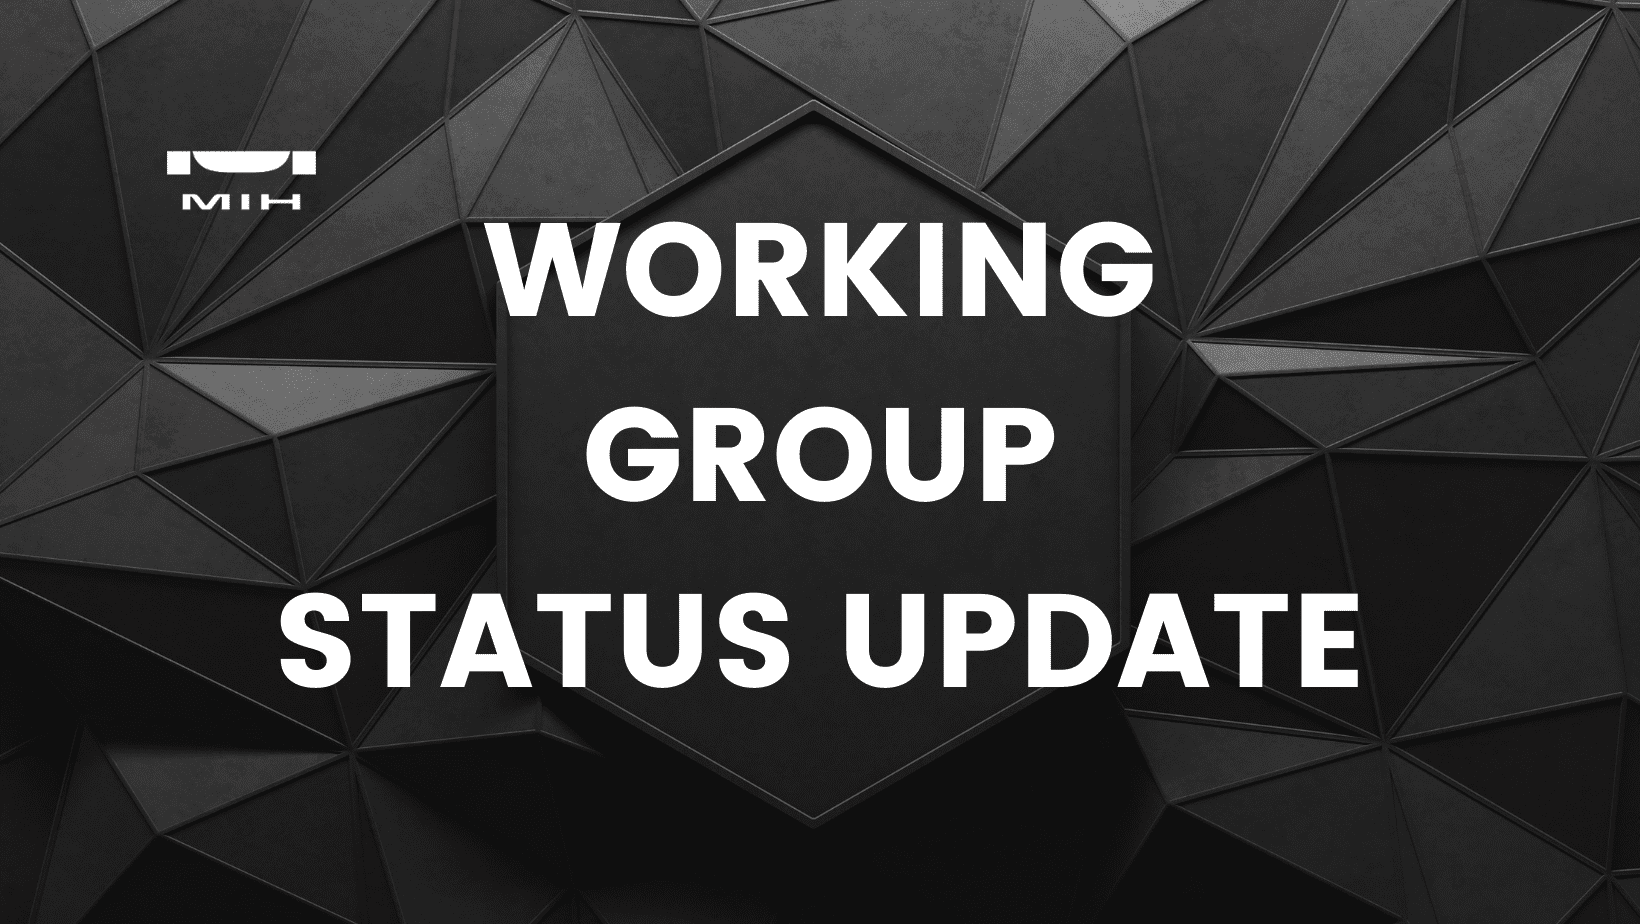 Working Group Status for Feb. 2022